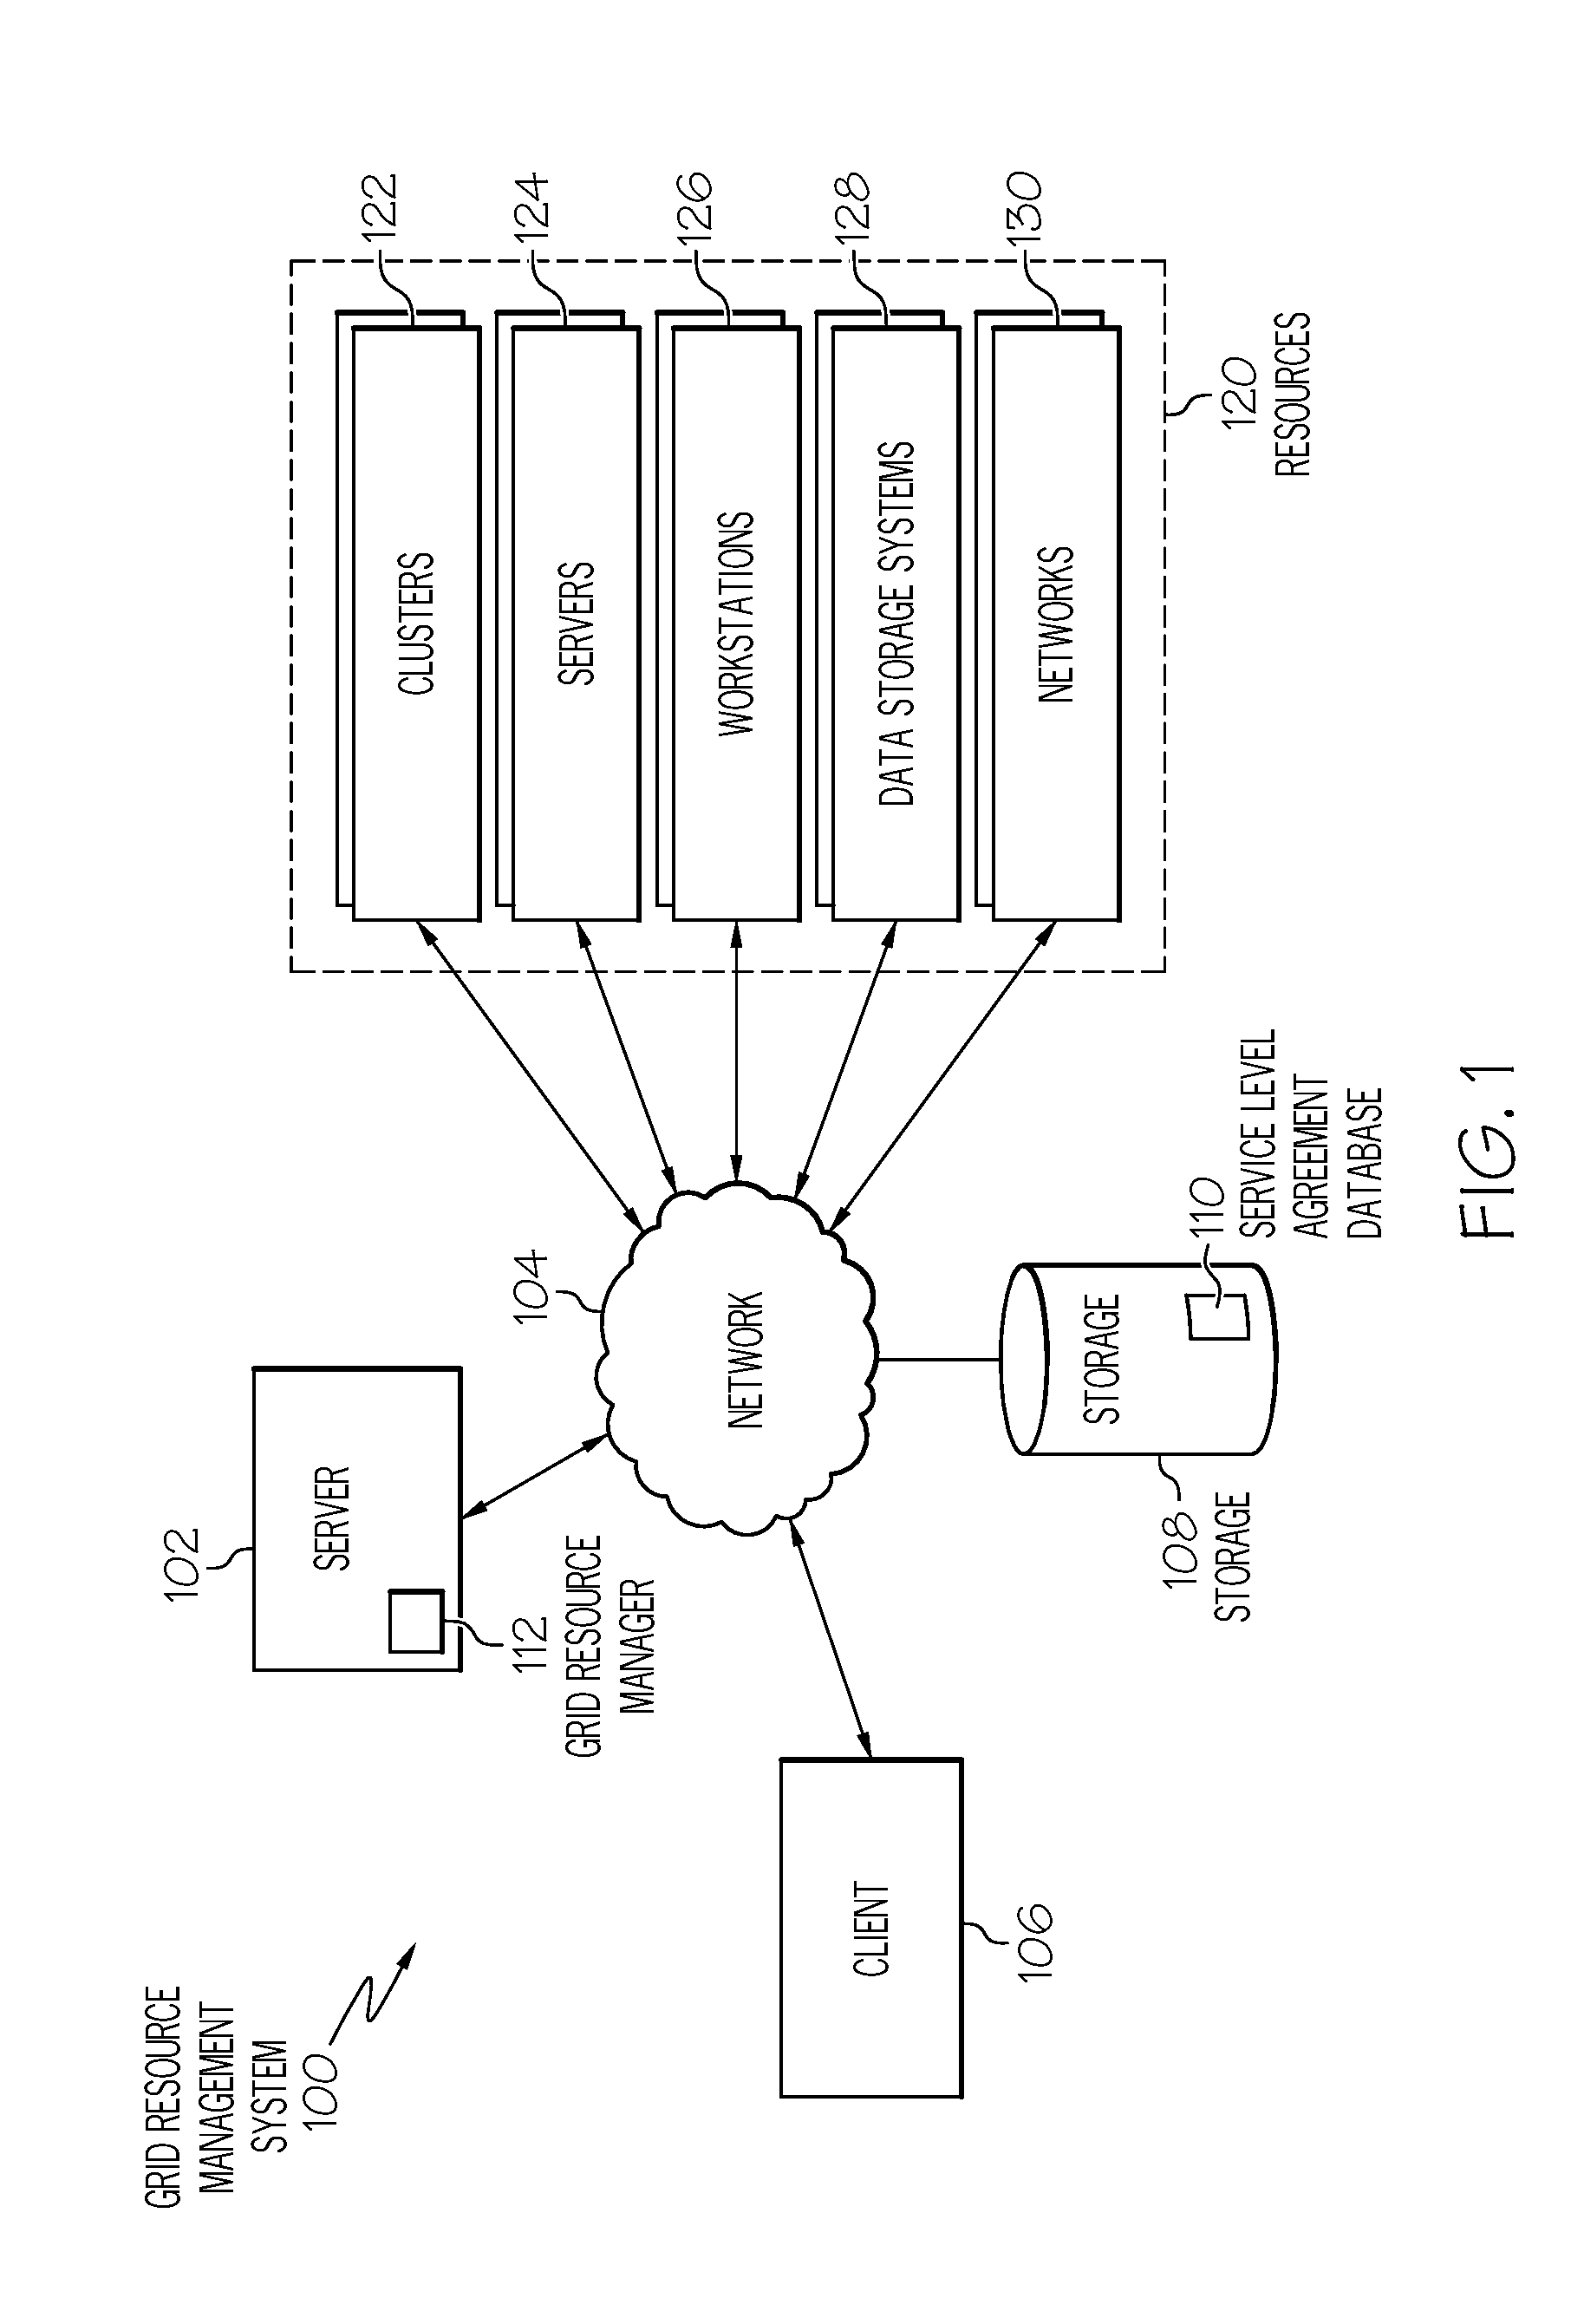 Management of grid computing resources based on service level requirements